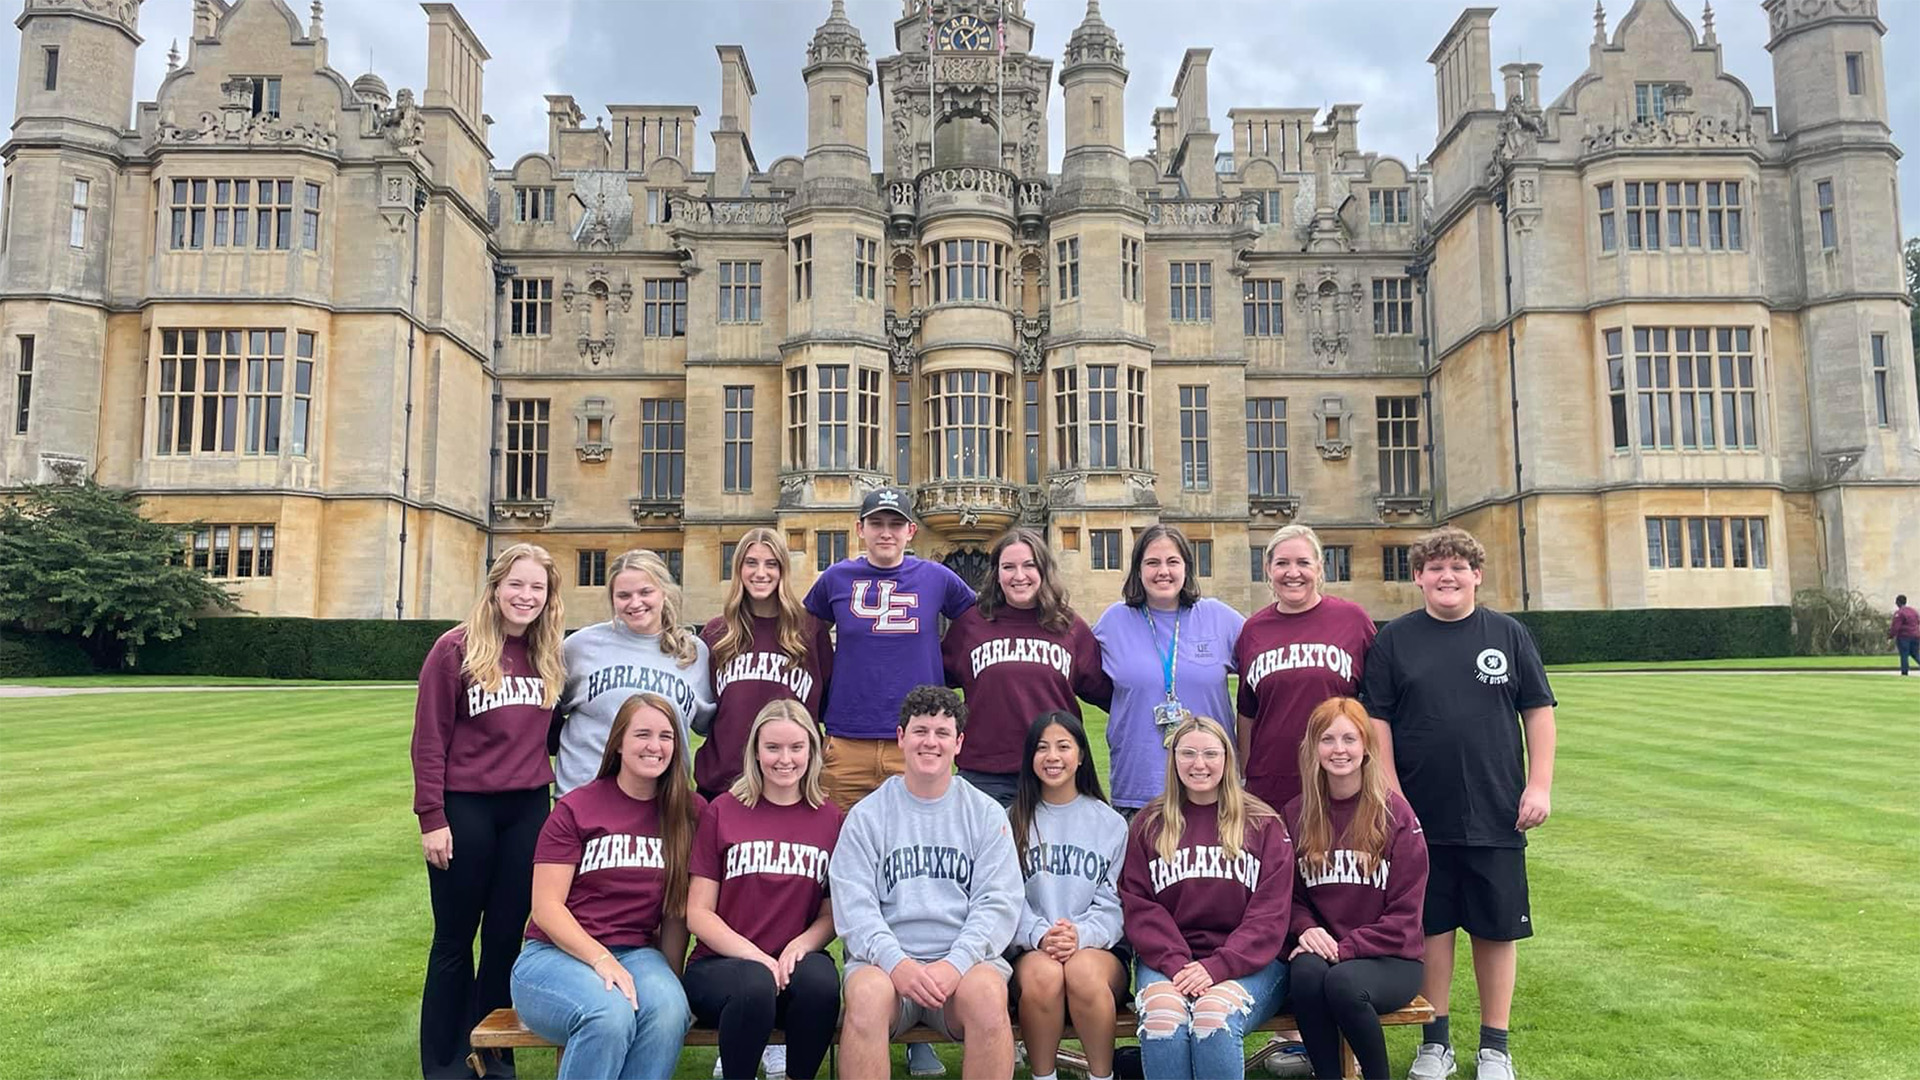 Students in front of Harlaxton